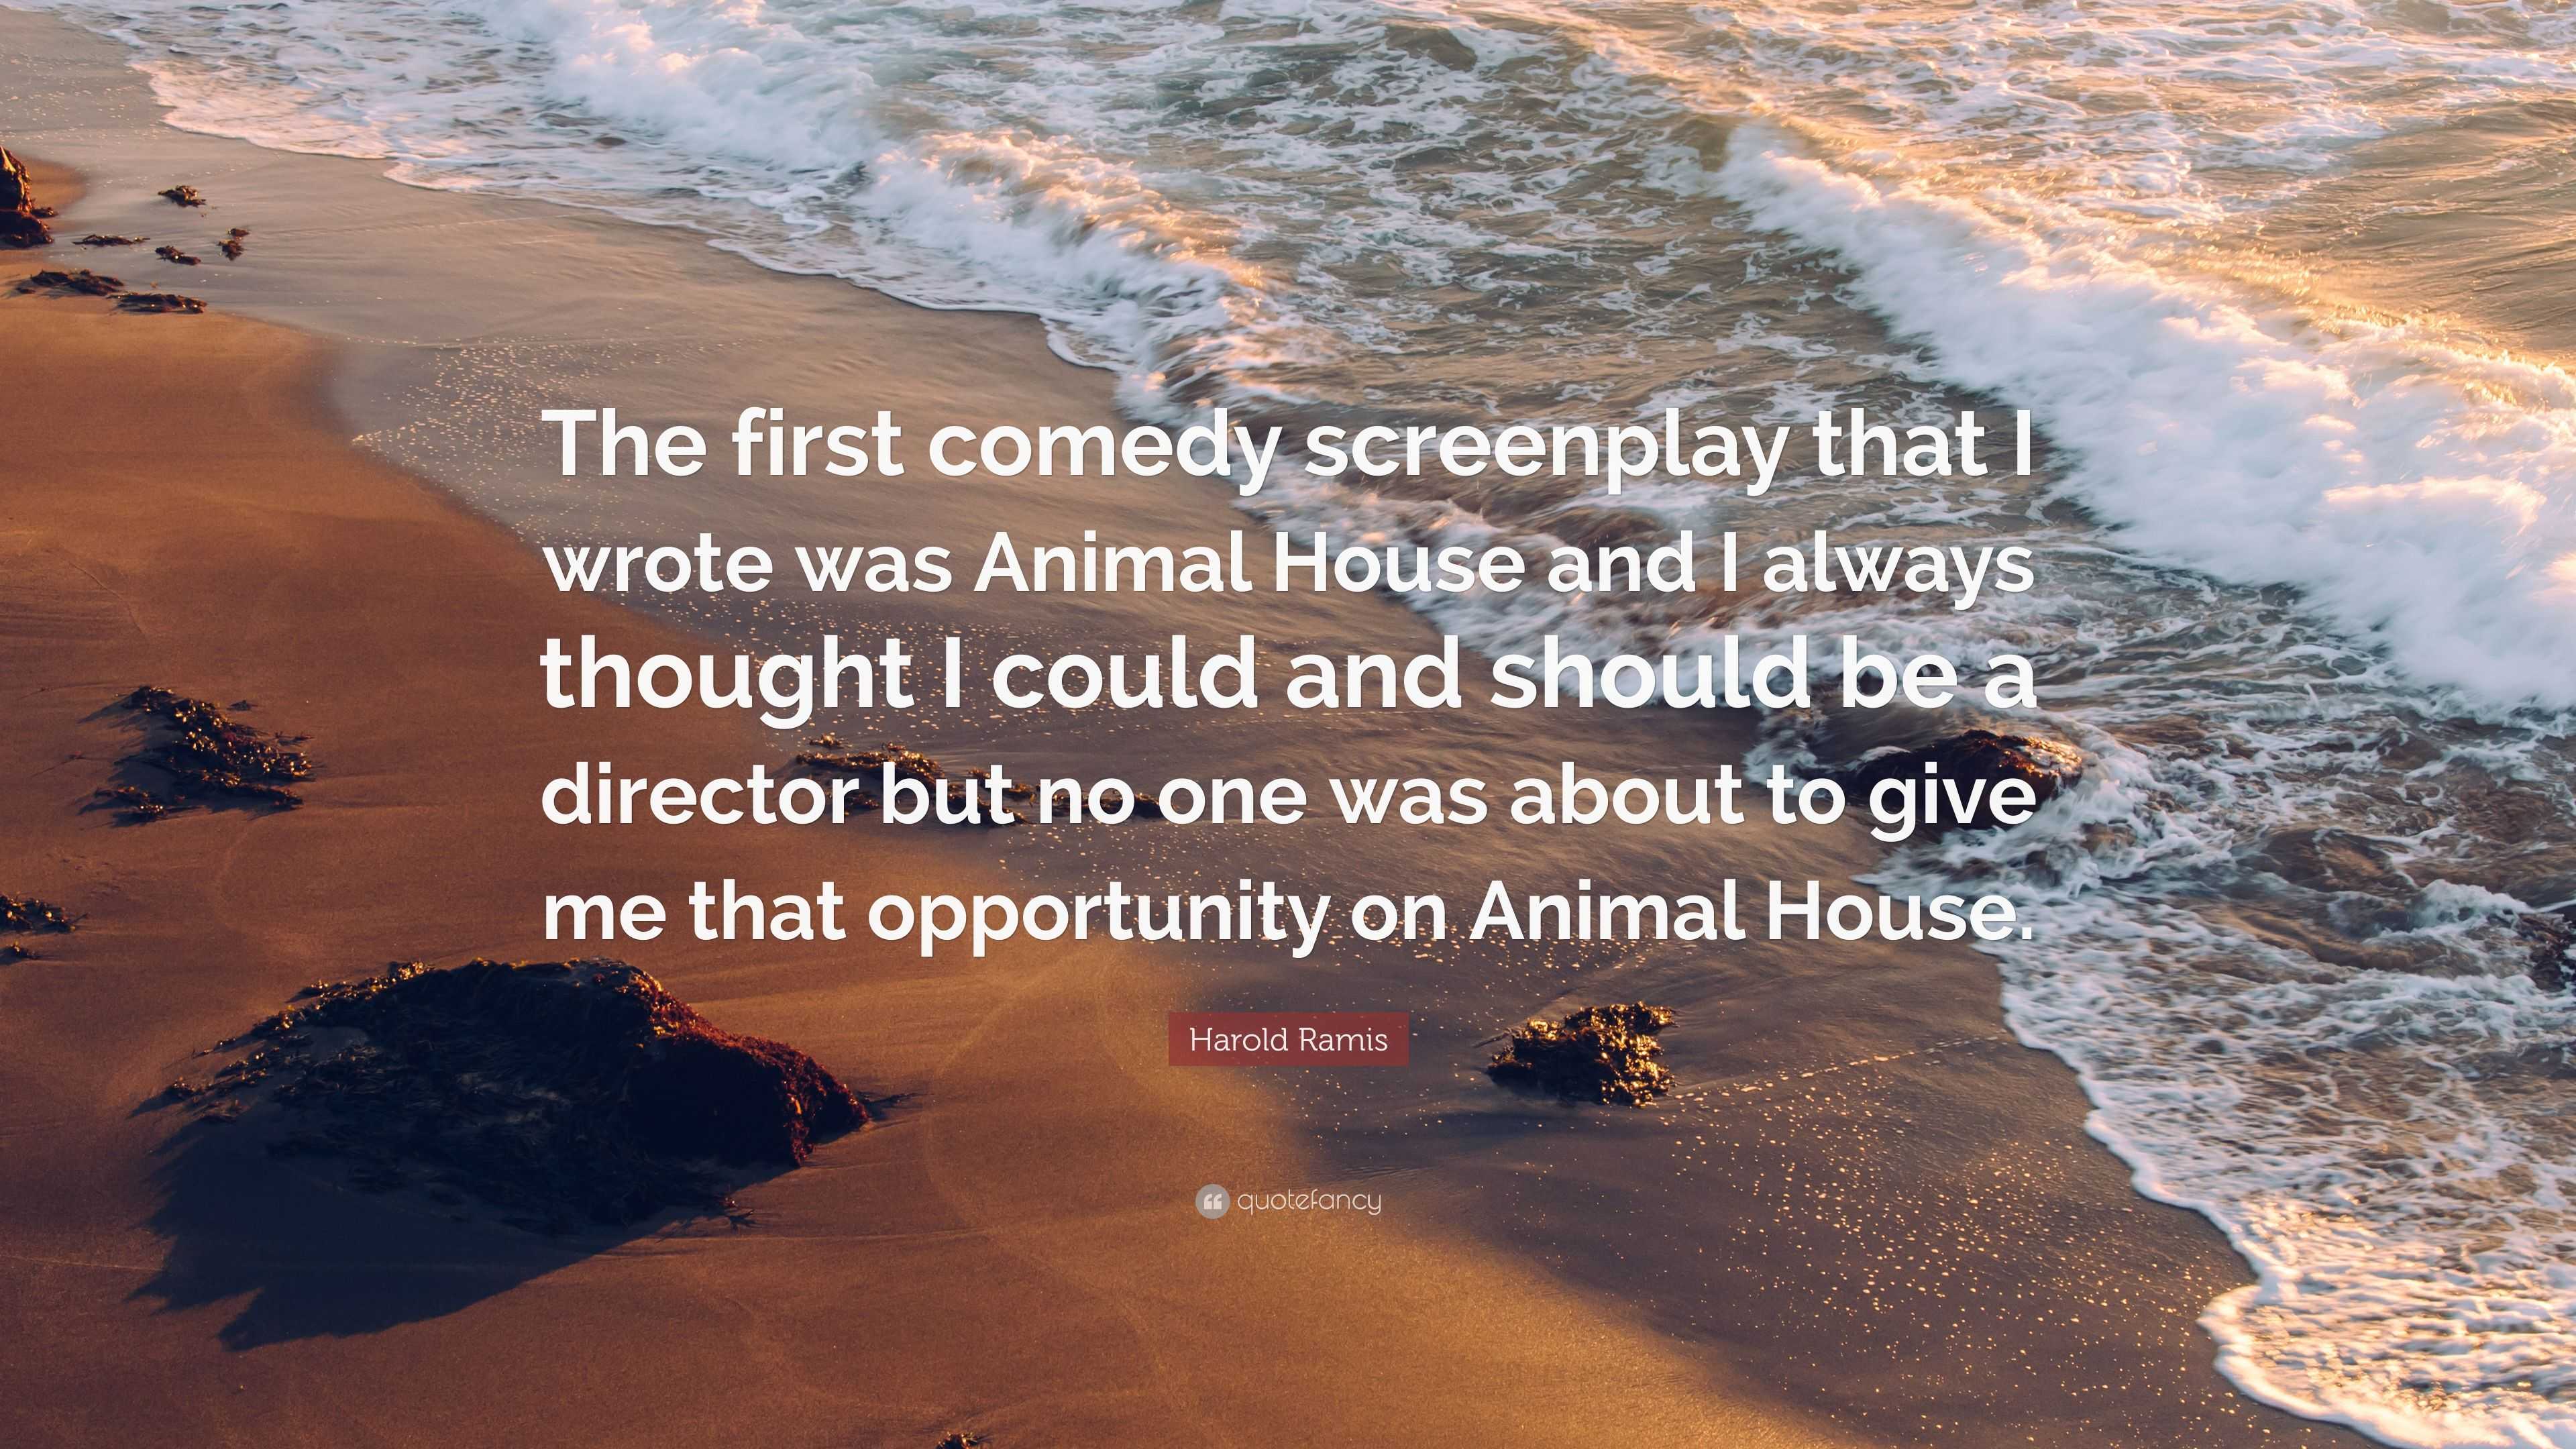 Harold Ramis Quote: “The first comedy screenplay that I wrote was Animal  House and I always thought I could and should be a director but no o...”